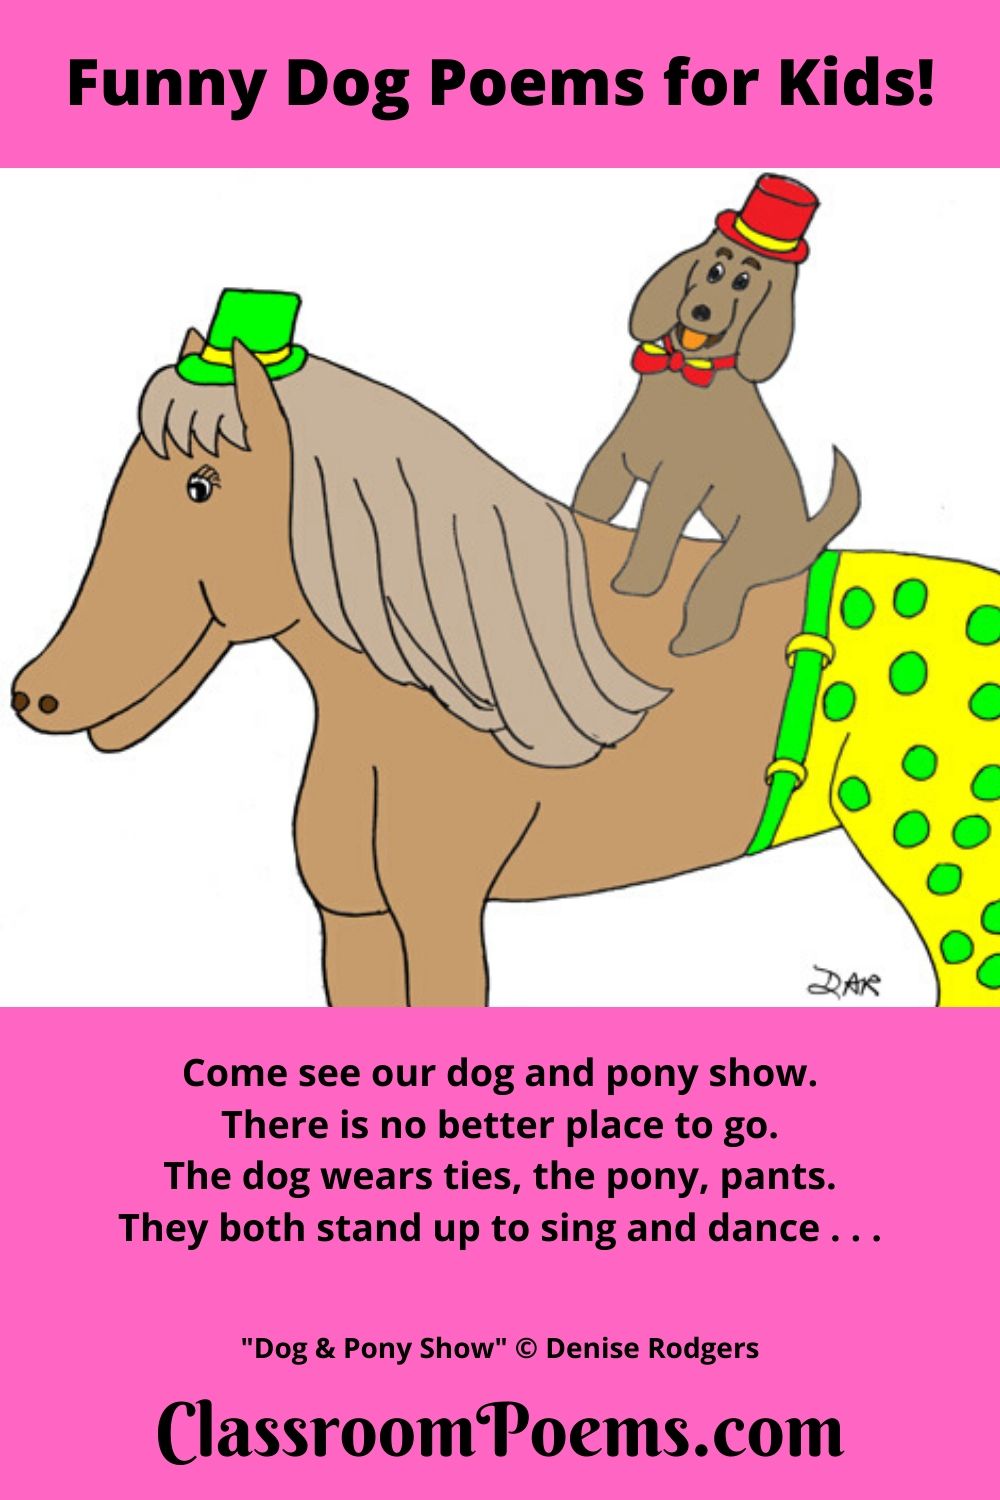 Funny dog poems about dog shows, dog poop, lazy dogs, and even a dog and pony show (and more)!